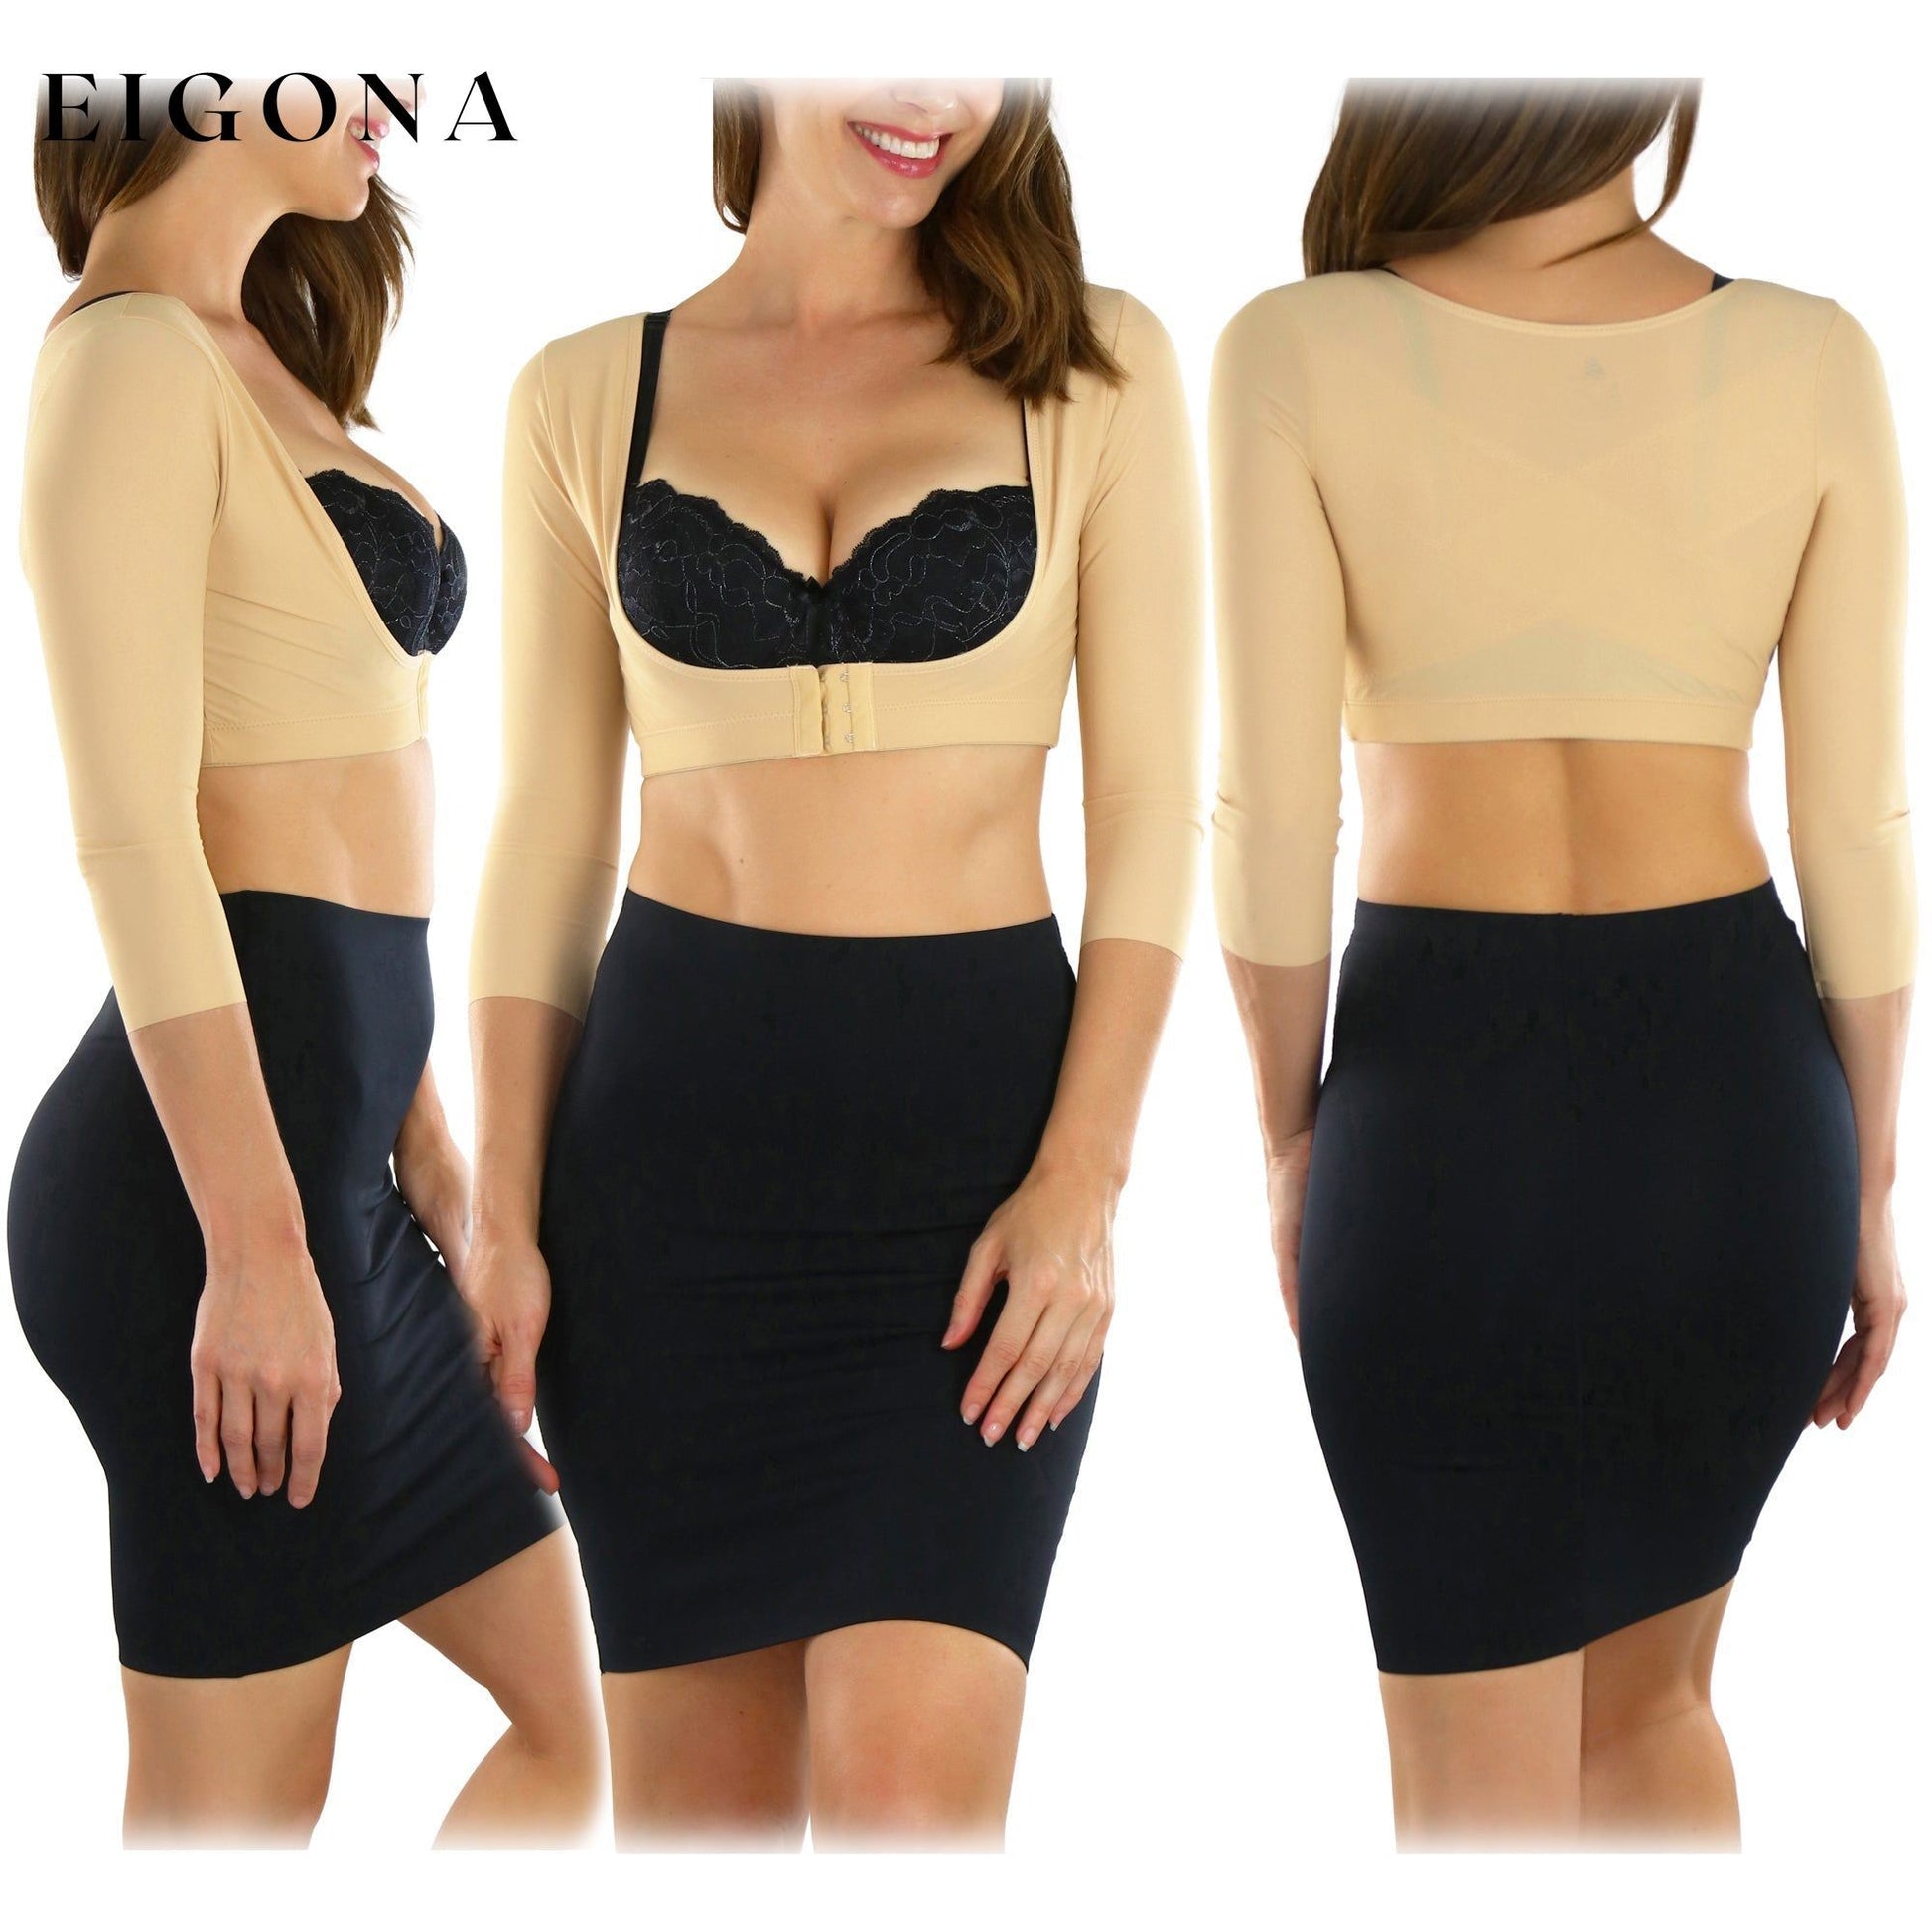 Women's Arm Shaper Slimming Top __stock:250 clothes refund_fee:1200 tops